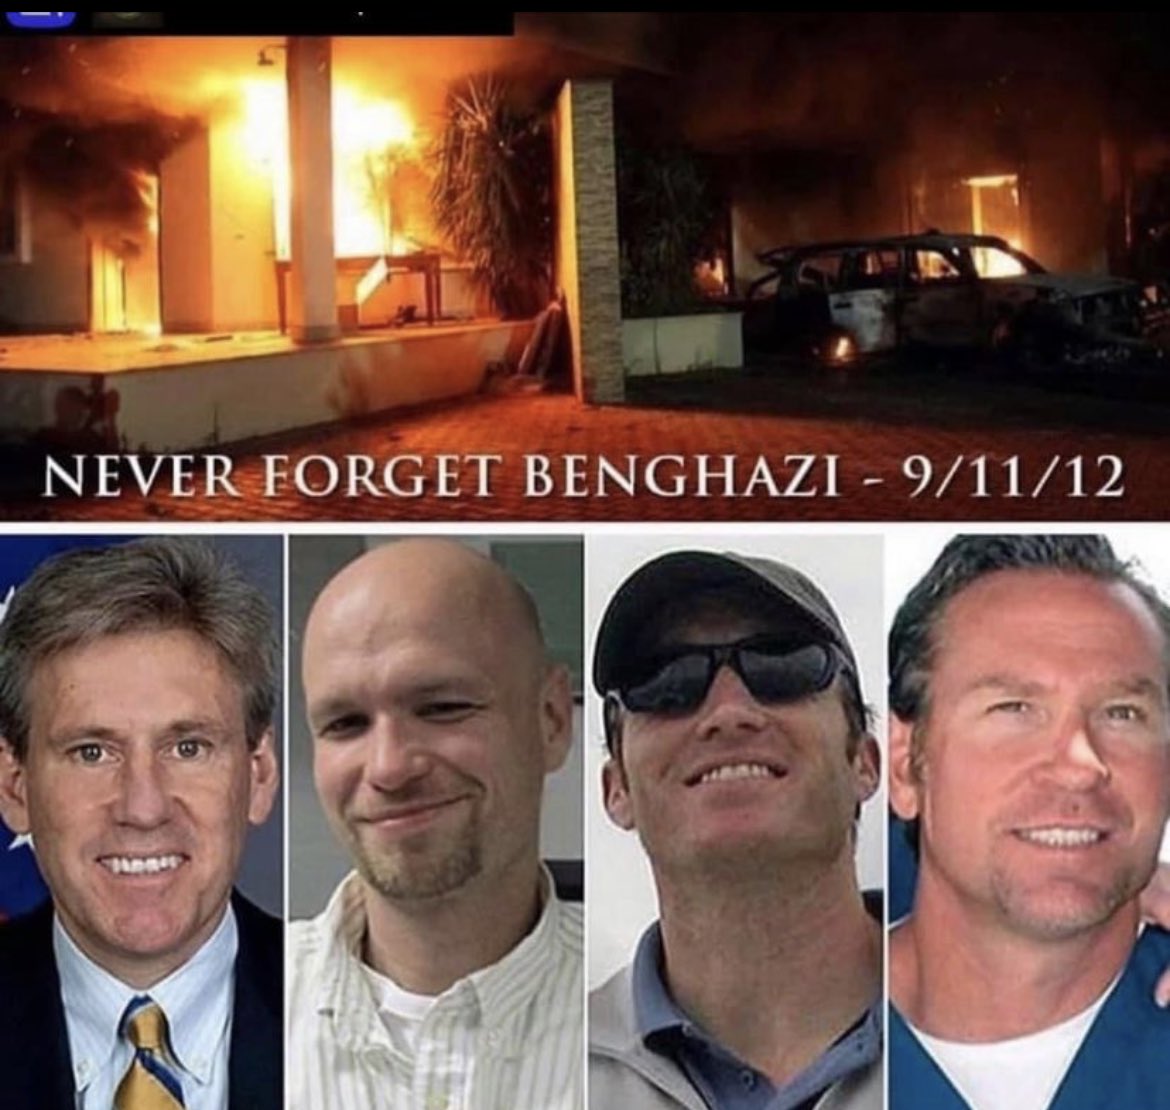 Thank you 🙋‍♀️
NEVER FORGET BENGHAZI 🙌